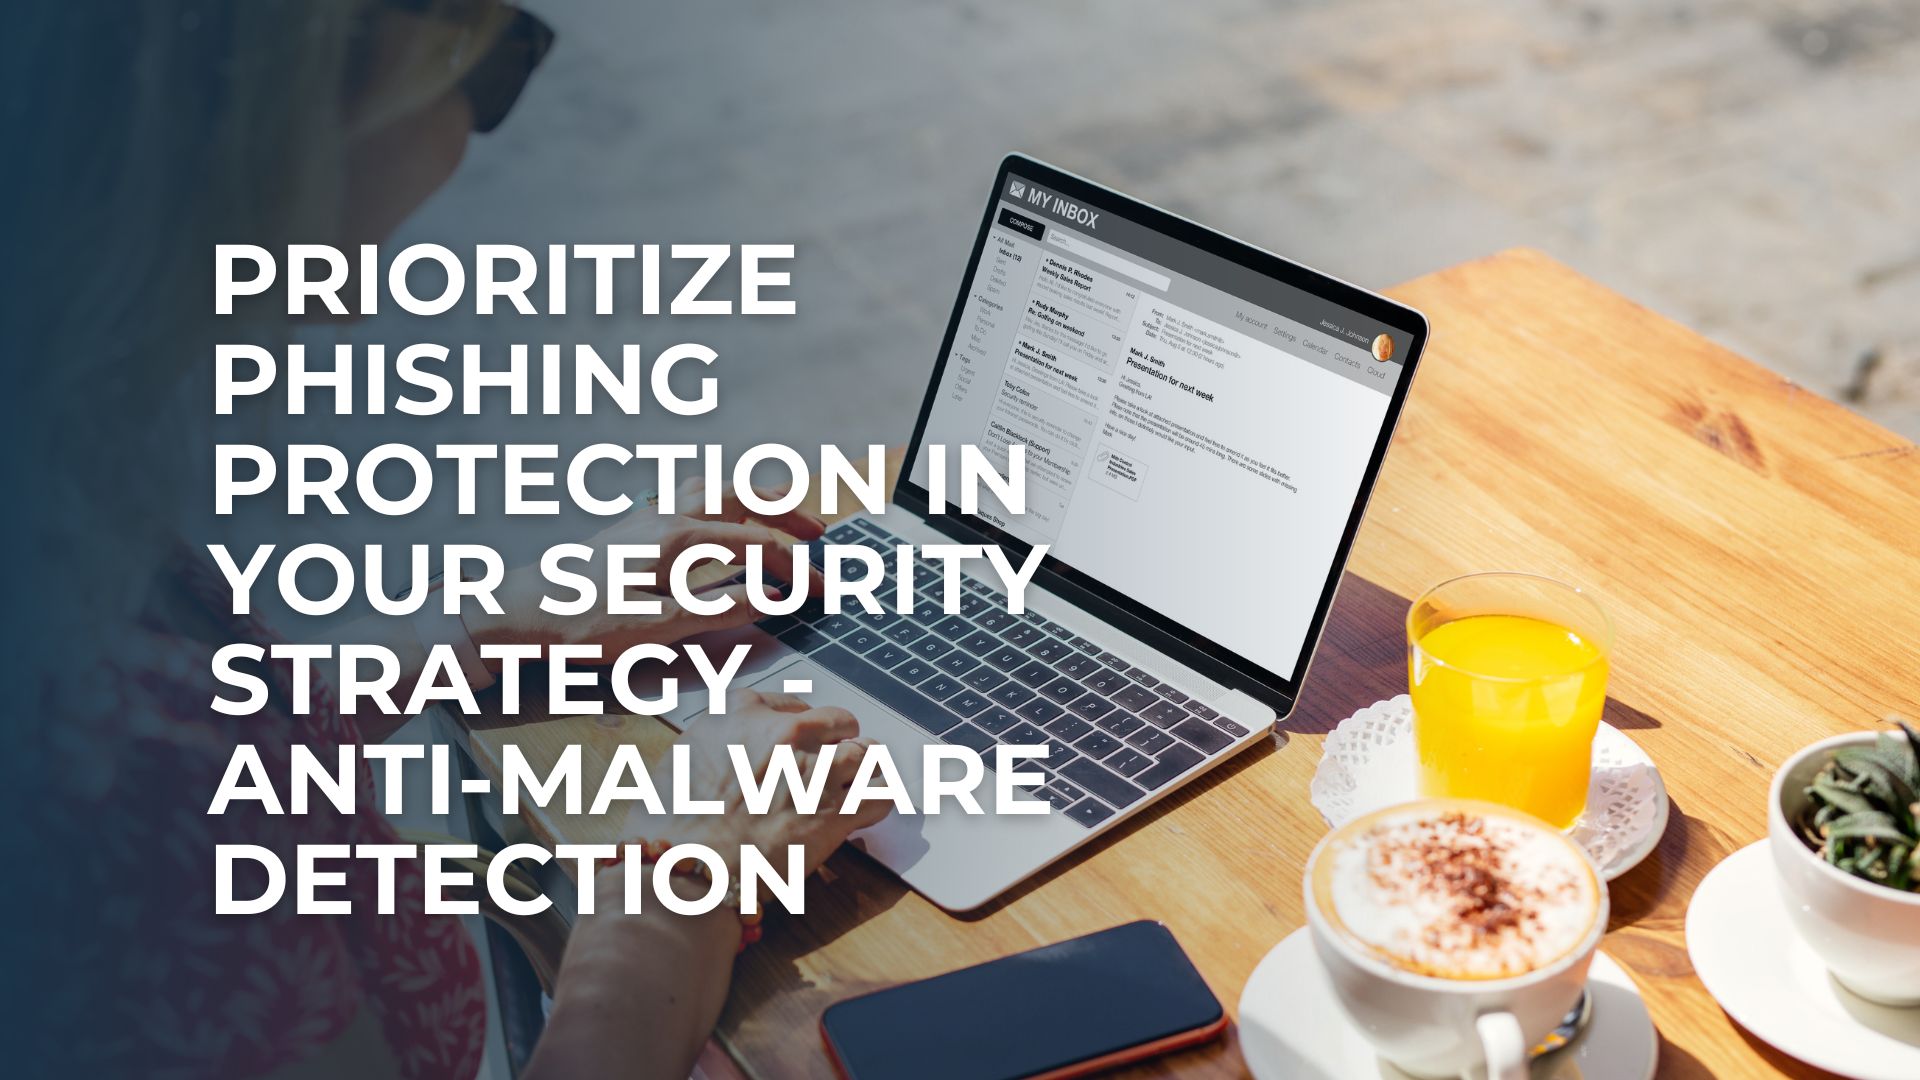 Prioritize Phishing Protection and Anti-Malware Detection in Your Security Strategy